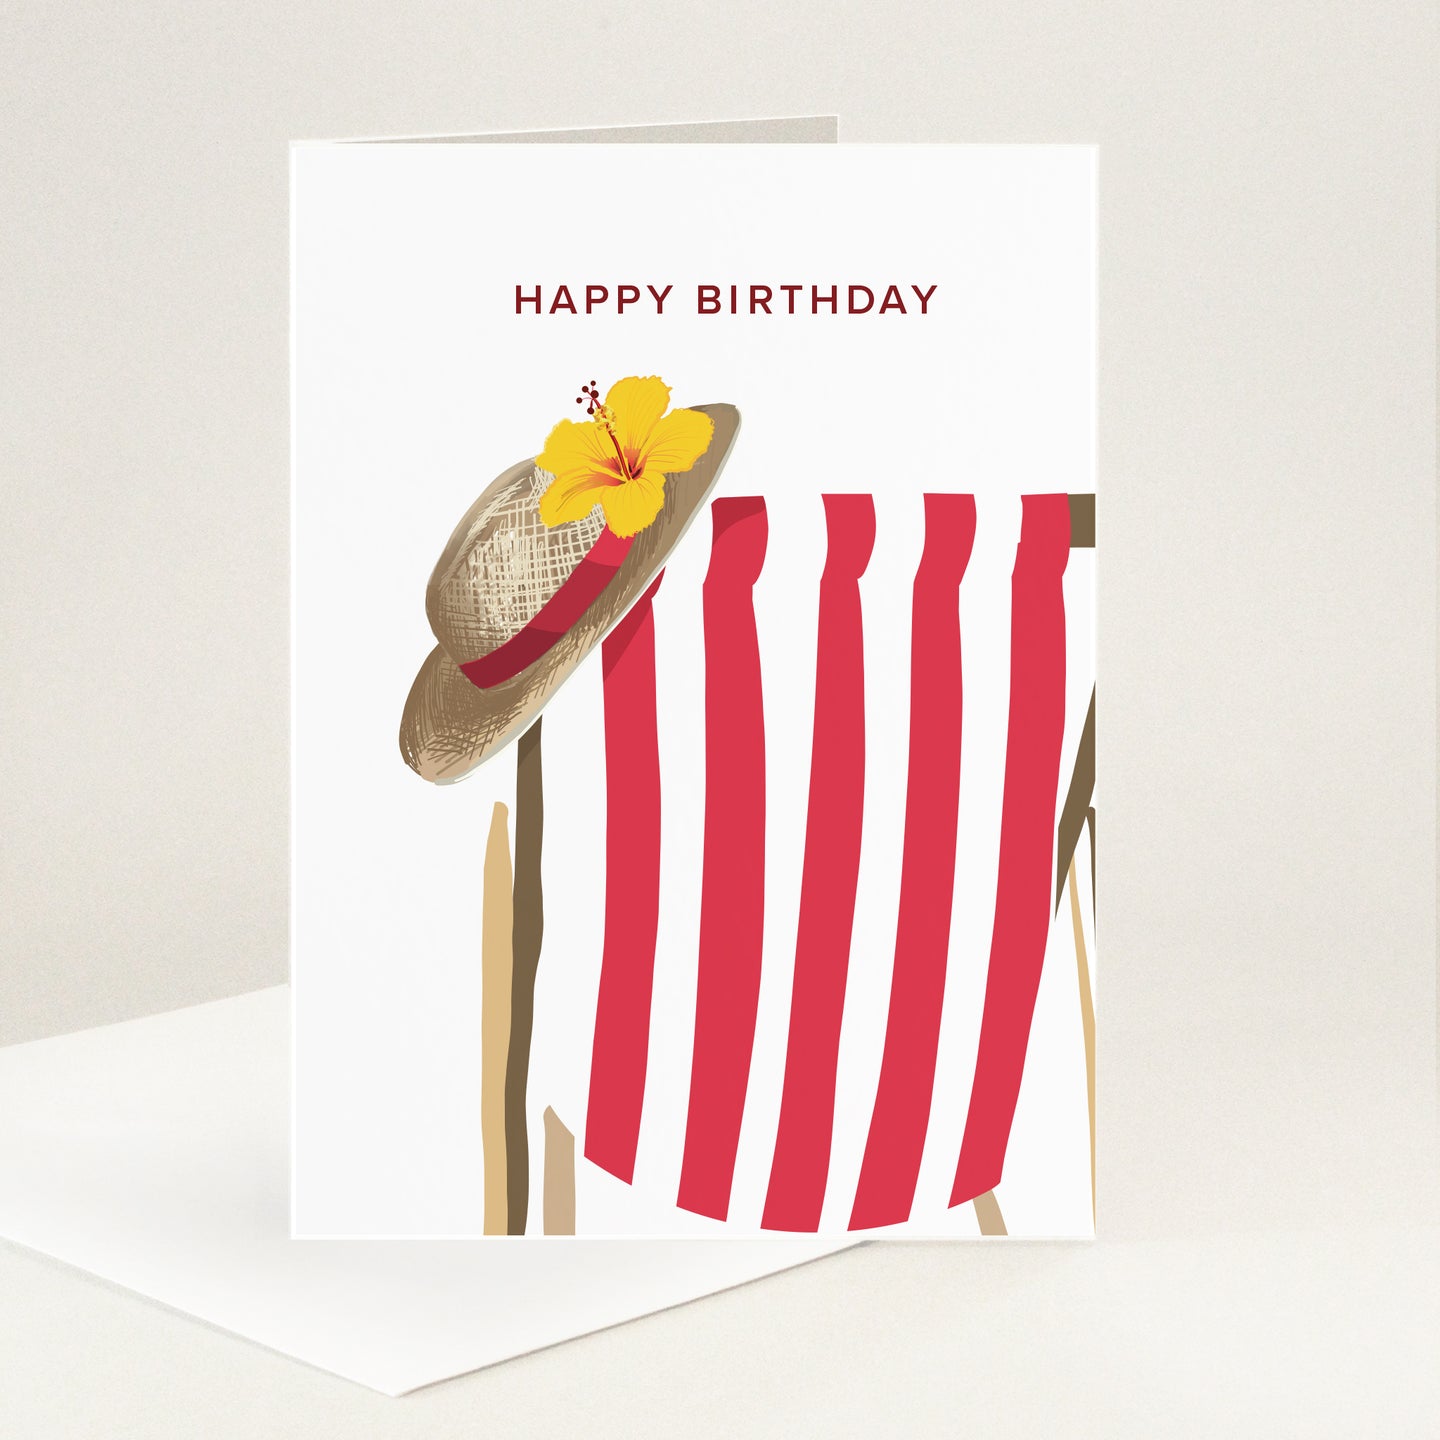 Stripy red deckchair with a wide brimmed straw sunhat and hibiscus flower balanced on the side.